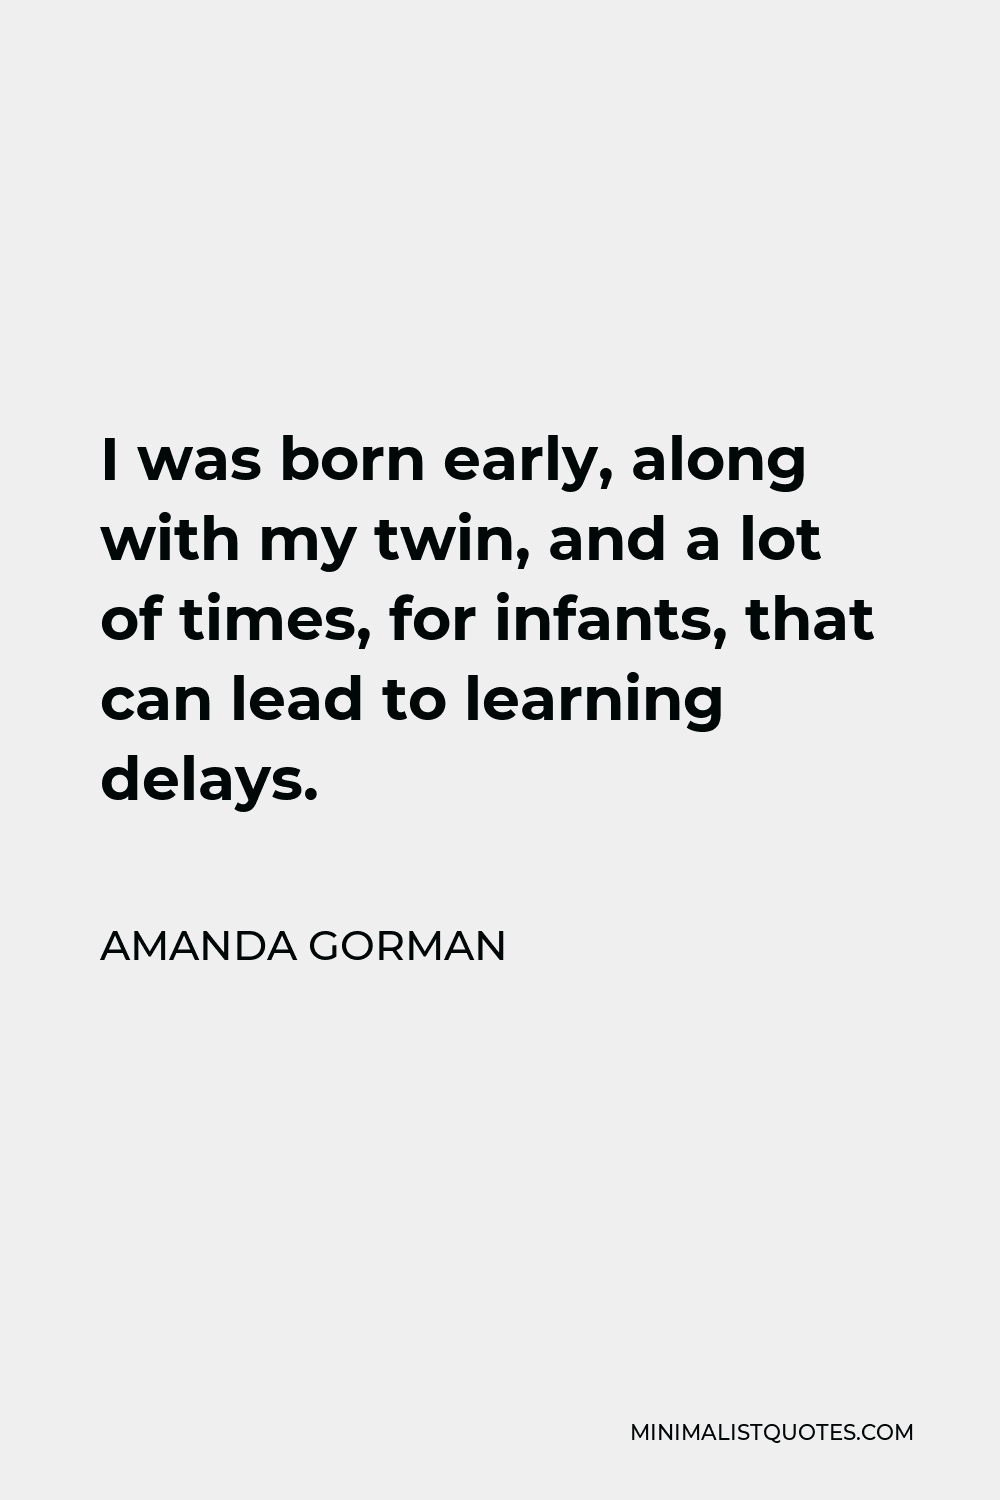 Amanda Gorman Quote - I was born early, along with my twin, and a lot of times, for infants, that can lead to learning delays.